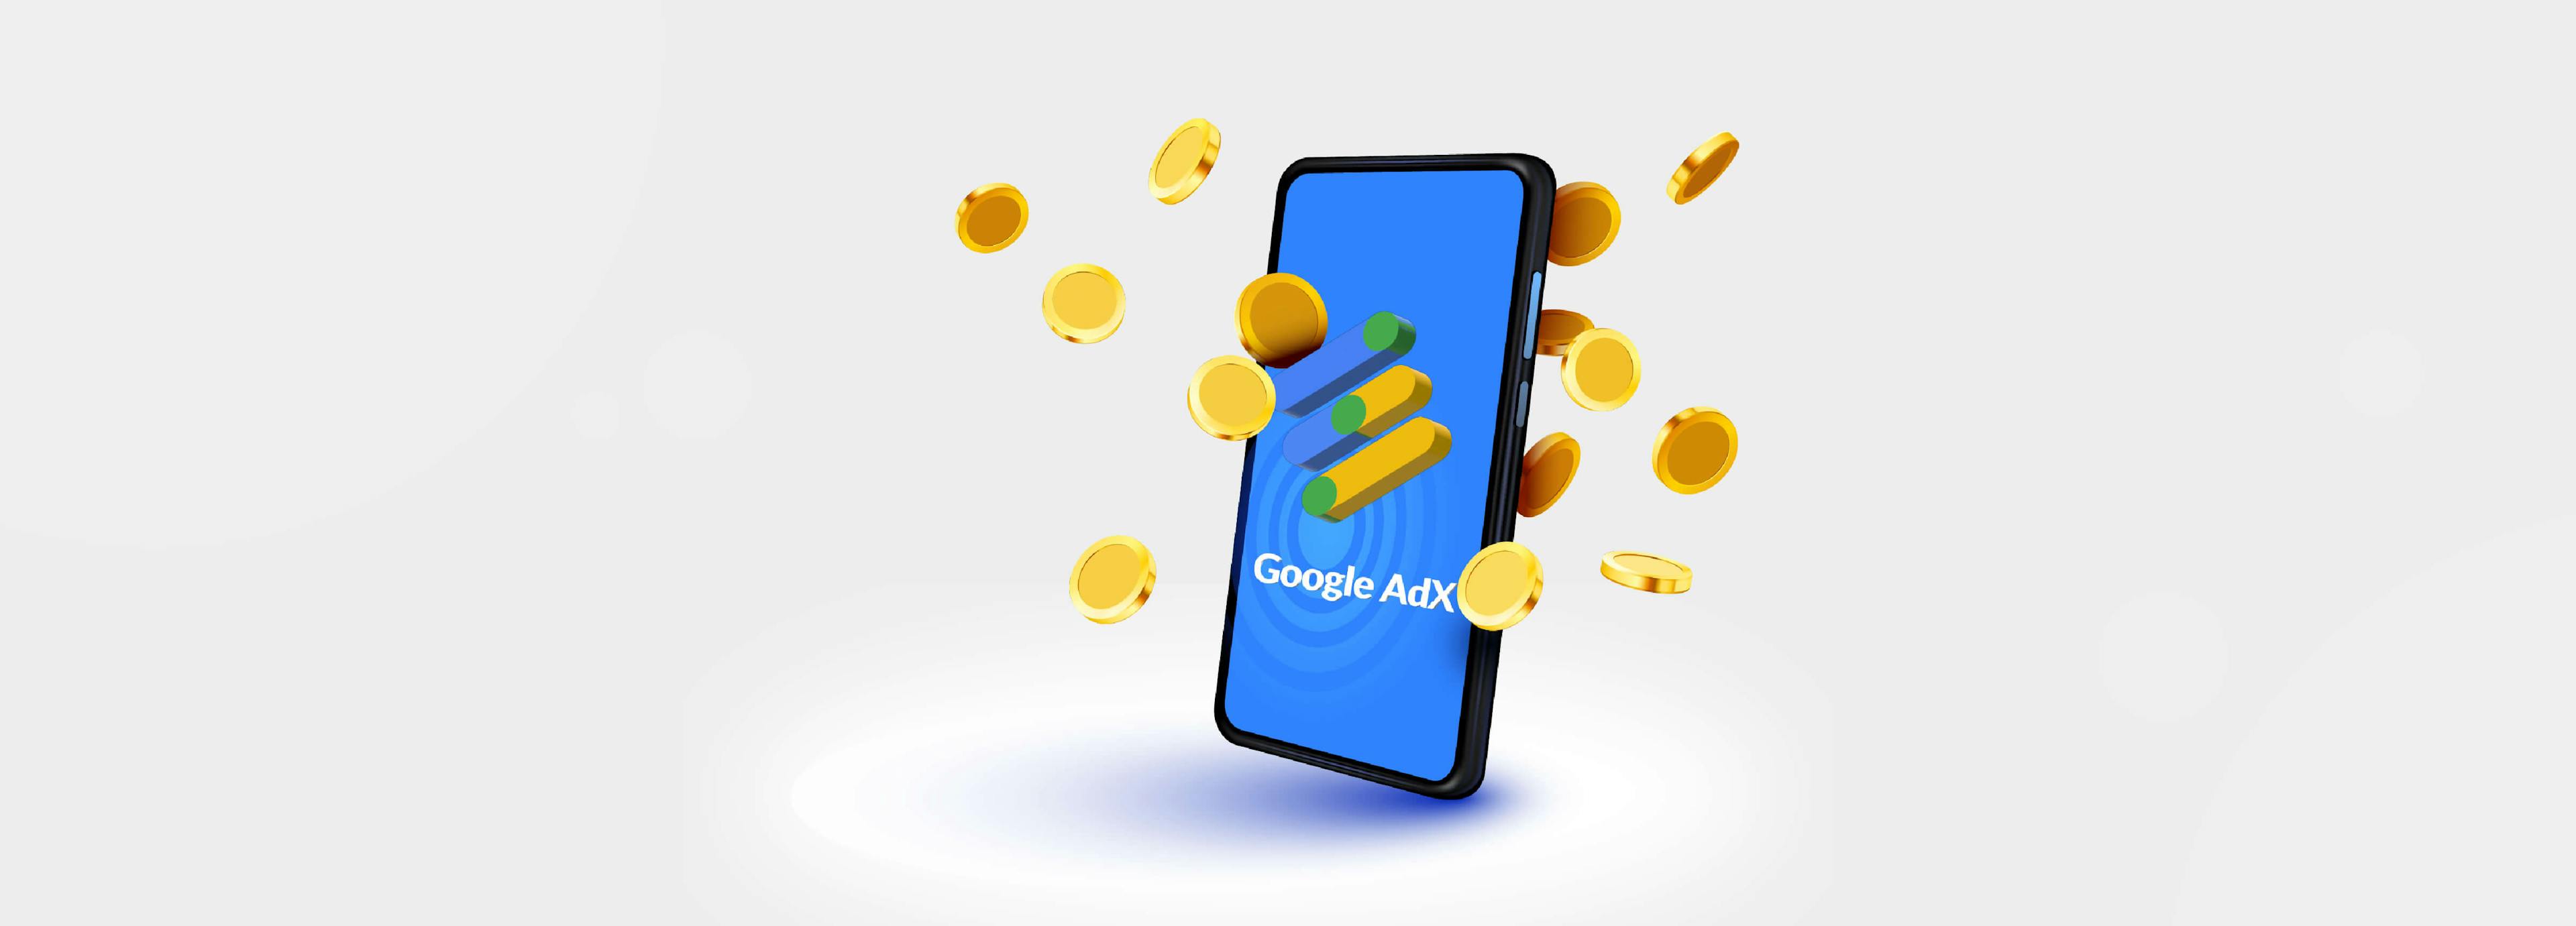 How to choose a reliable Google AdX Partner in 2023